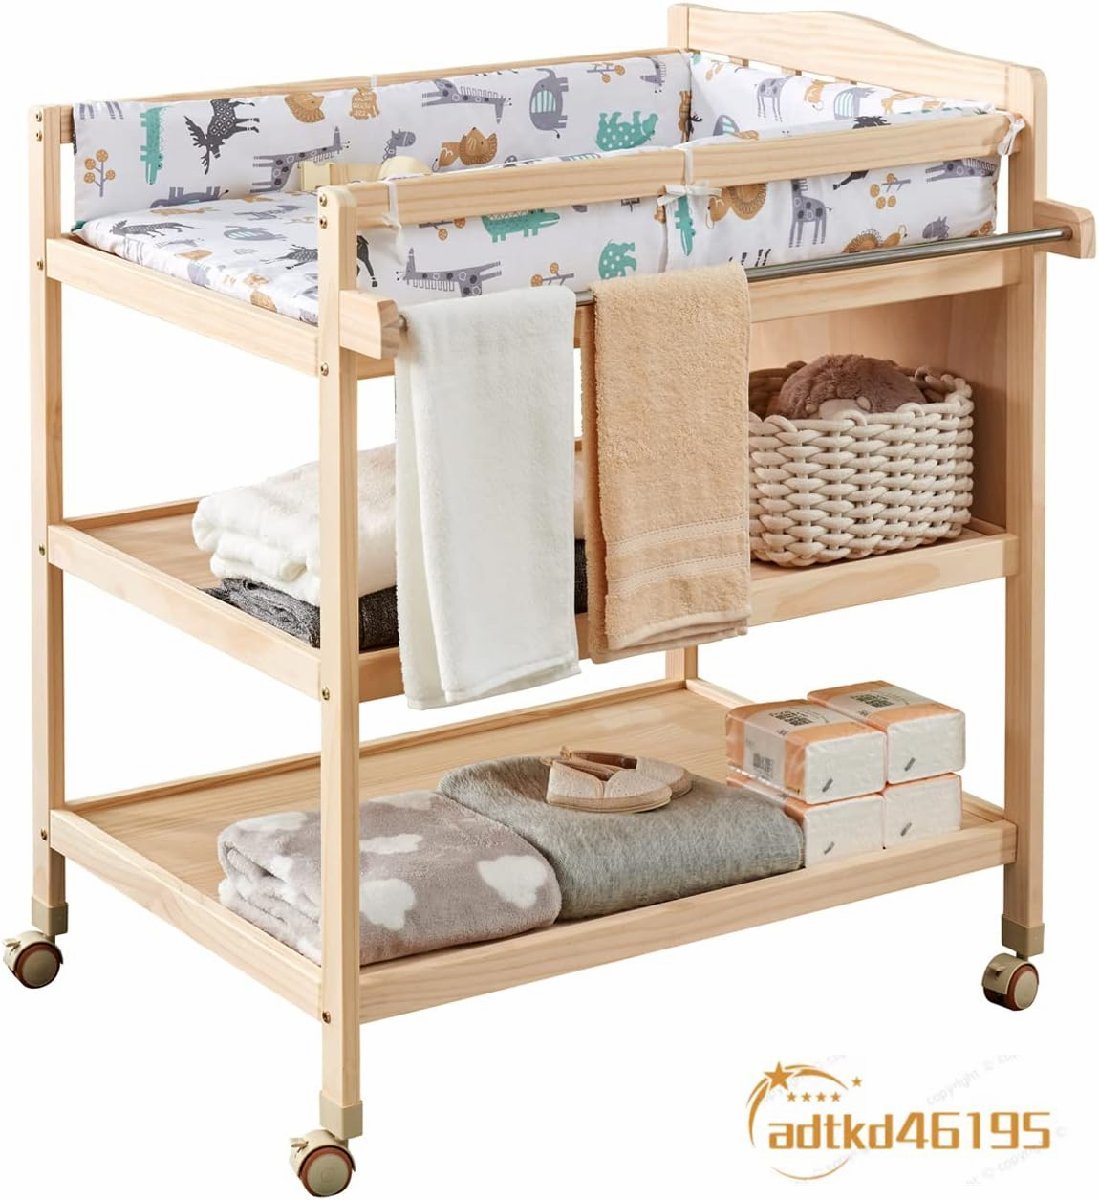  wooden baby care diapers exchange pcs newborn baby Homme tsu exchange pcs crib diapers change seat with casters child care . with casters storage shelves attaching 